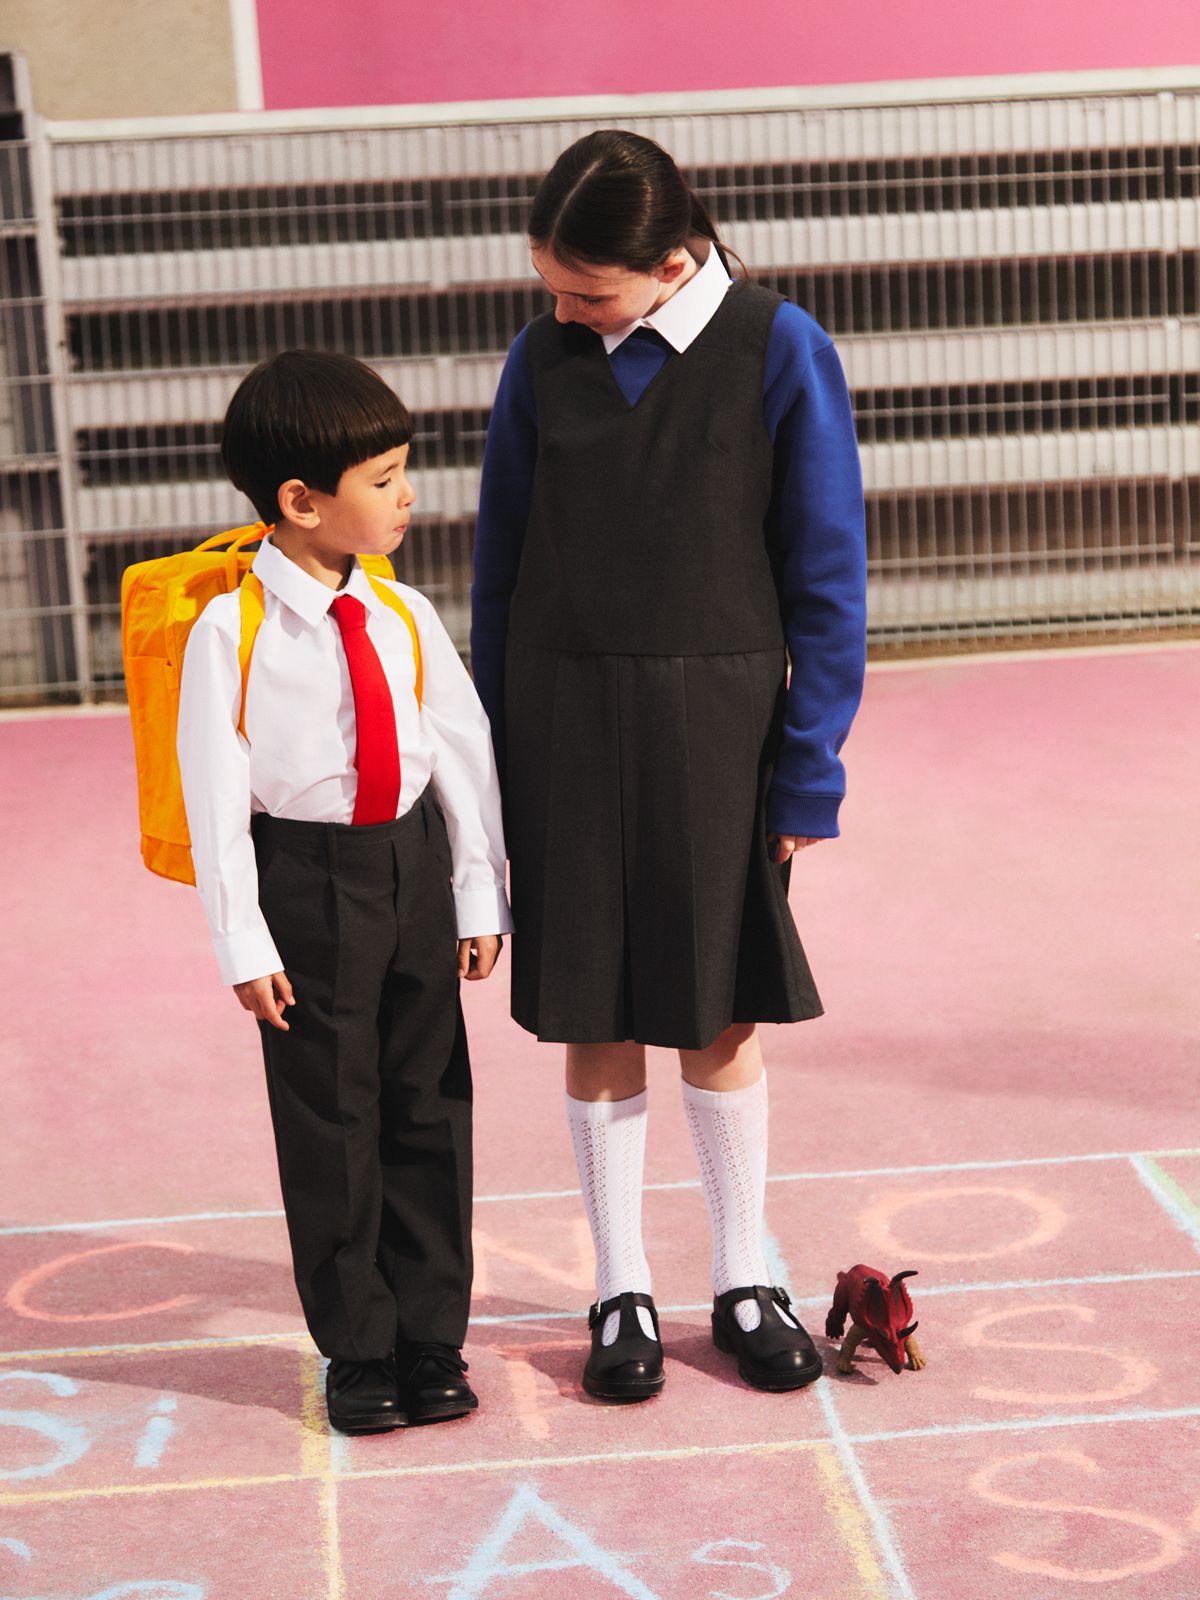 Image of a boy and girl in uniform standing in the playground